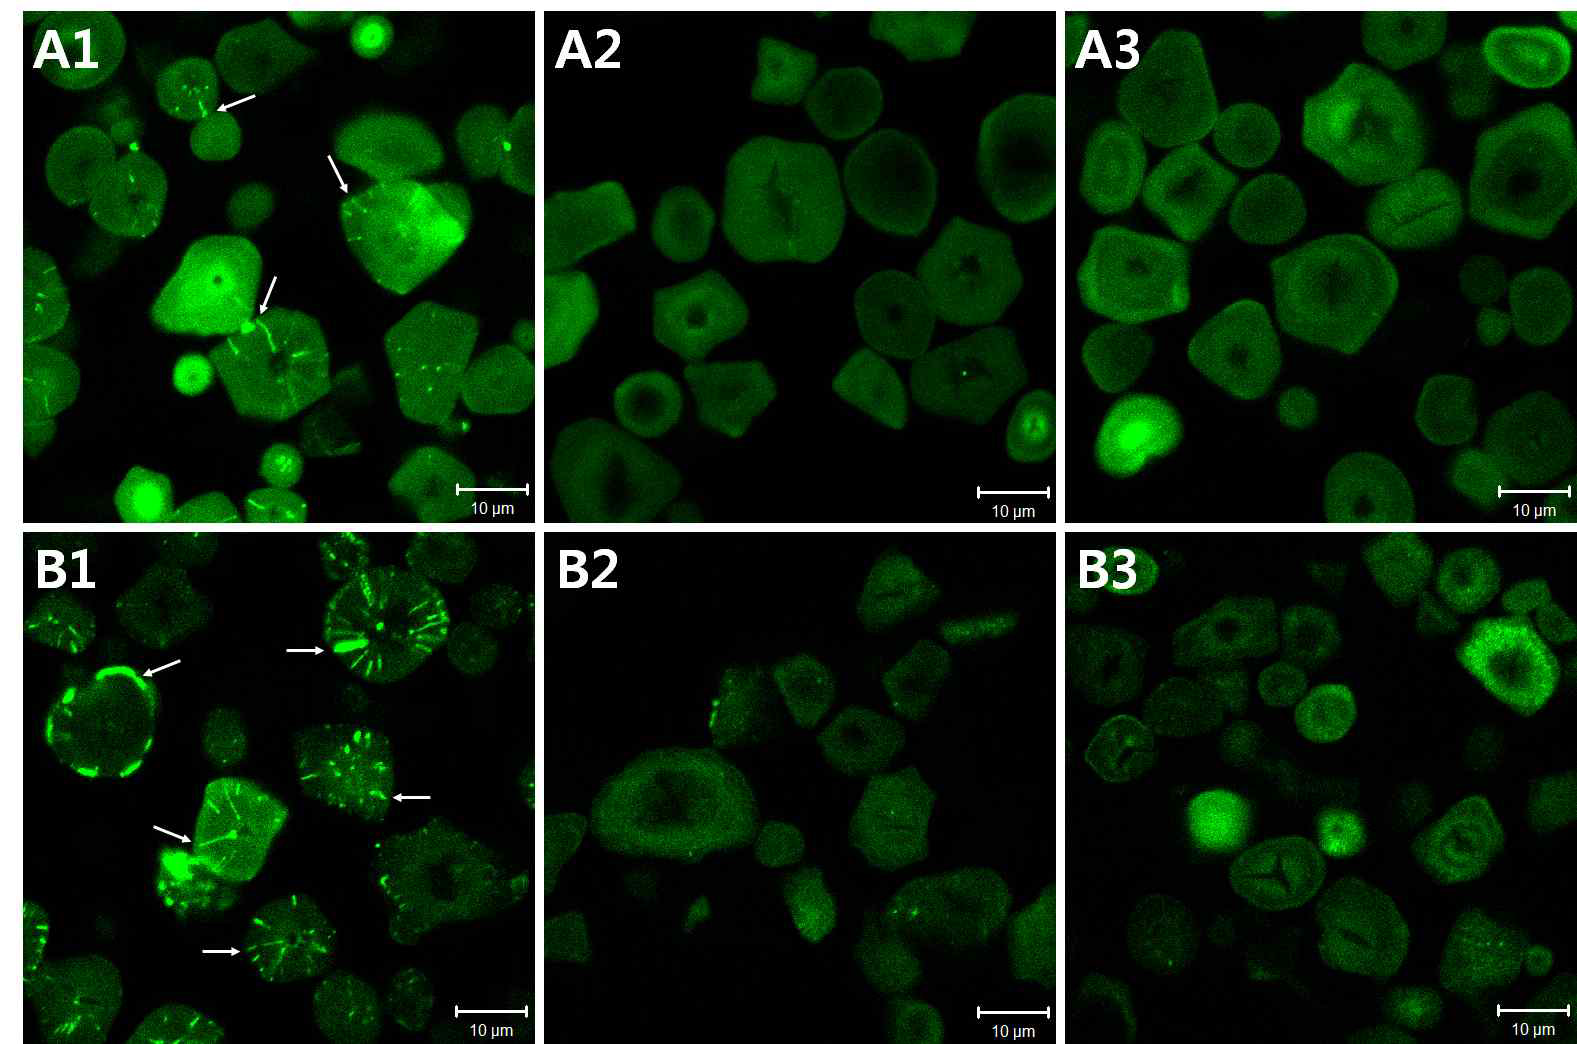 CLSM images of native (A1 & B1), pronase-treated (A2 & B2), and protease K-treated (A3 & B3) starches from normal (A1-A3) and waxy corn (B1-B3), labeled with CBQCA (scale bar=10 μm)